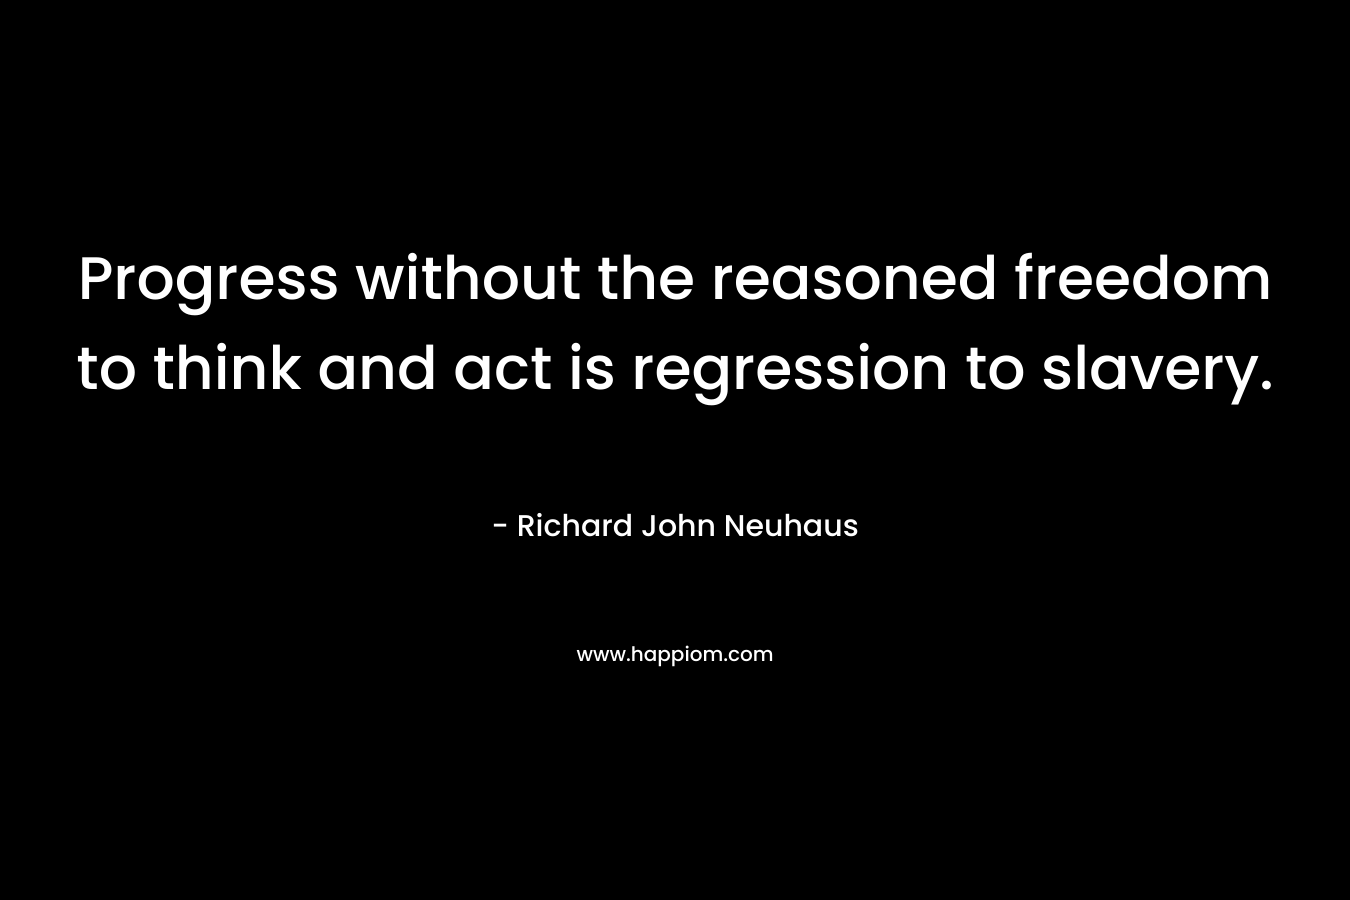 Progress without the reasoned freedom to think and act is regression to slavery. – Richard John Neuhaus